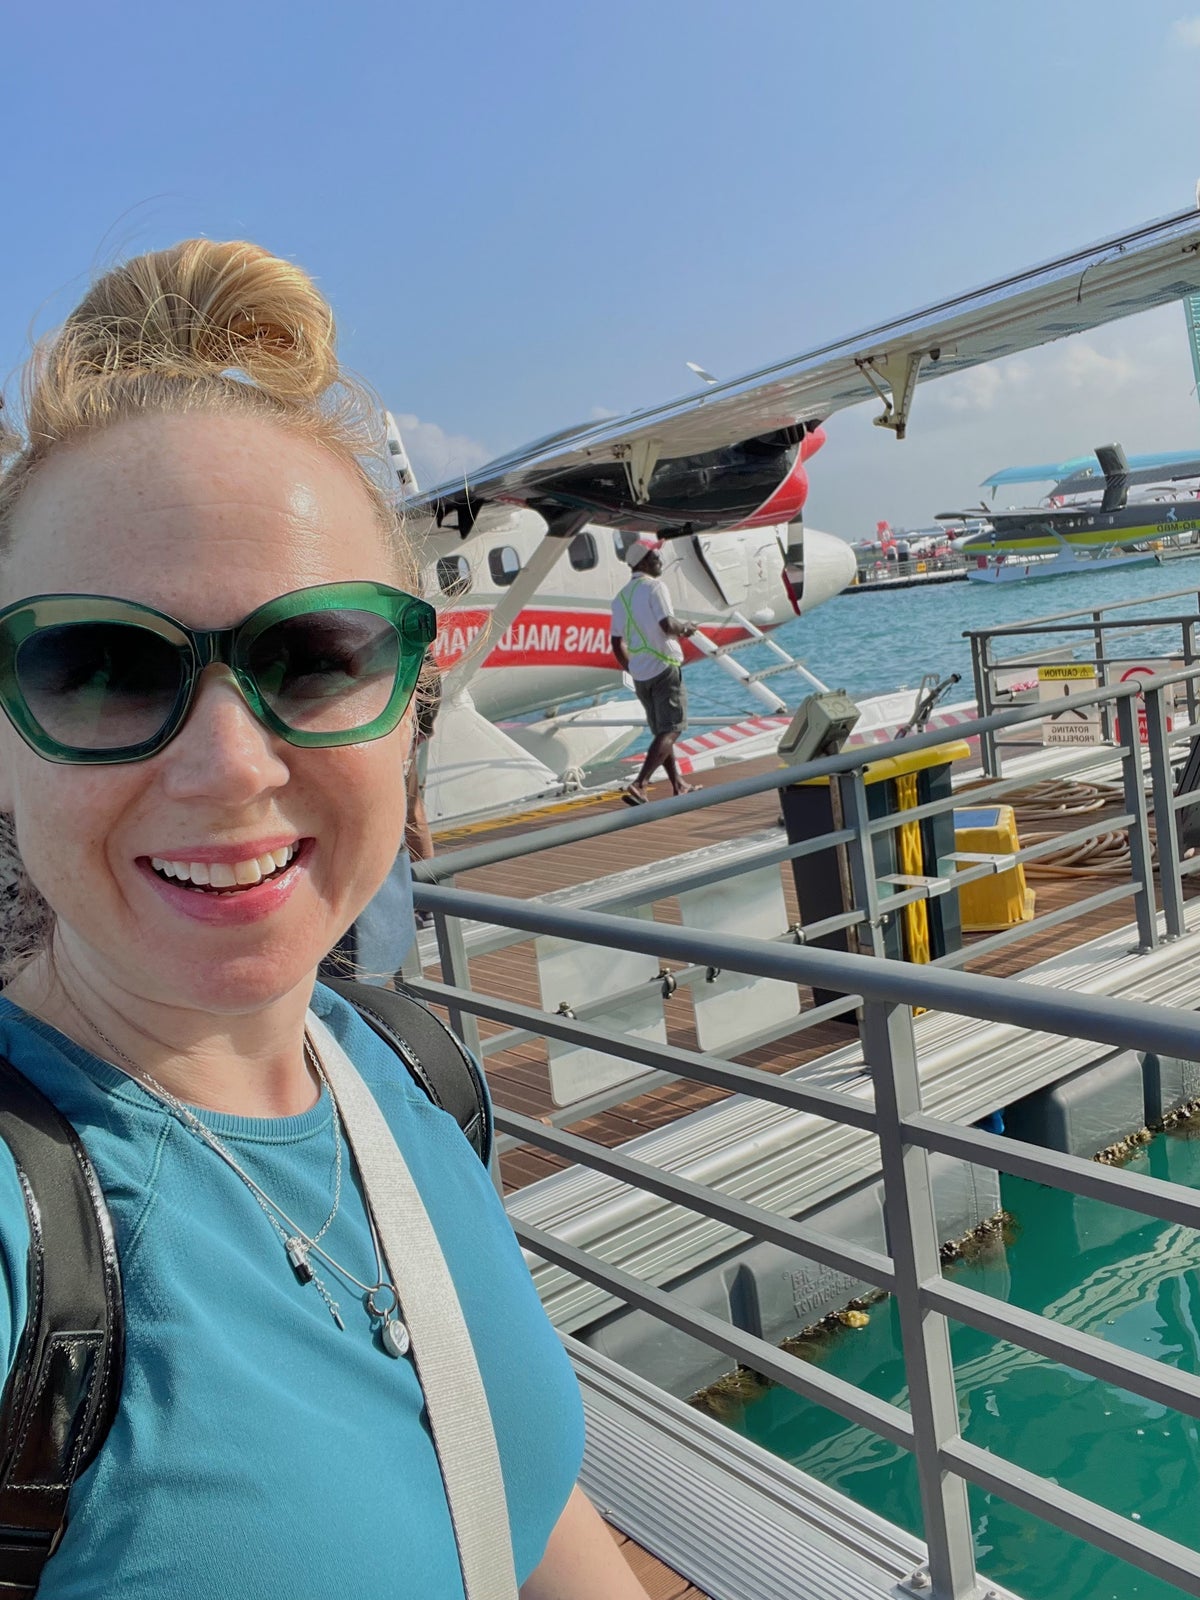 Getting on the seaplane transfer in the Maldives